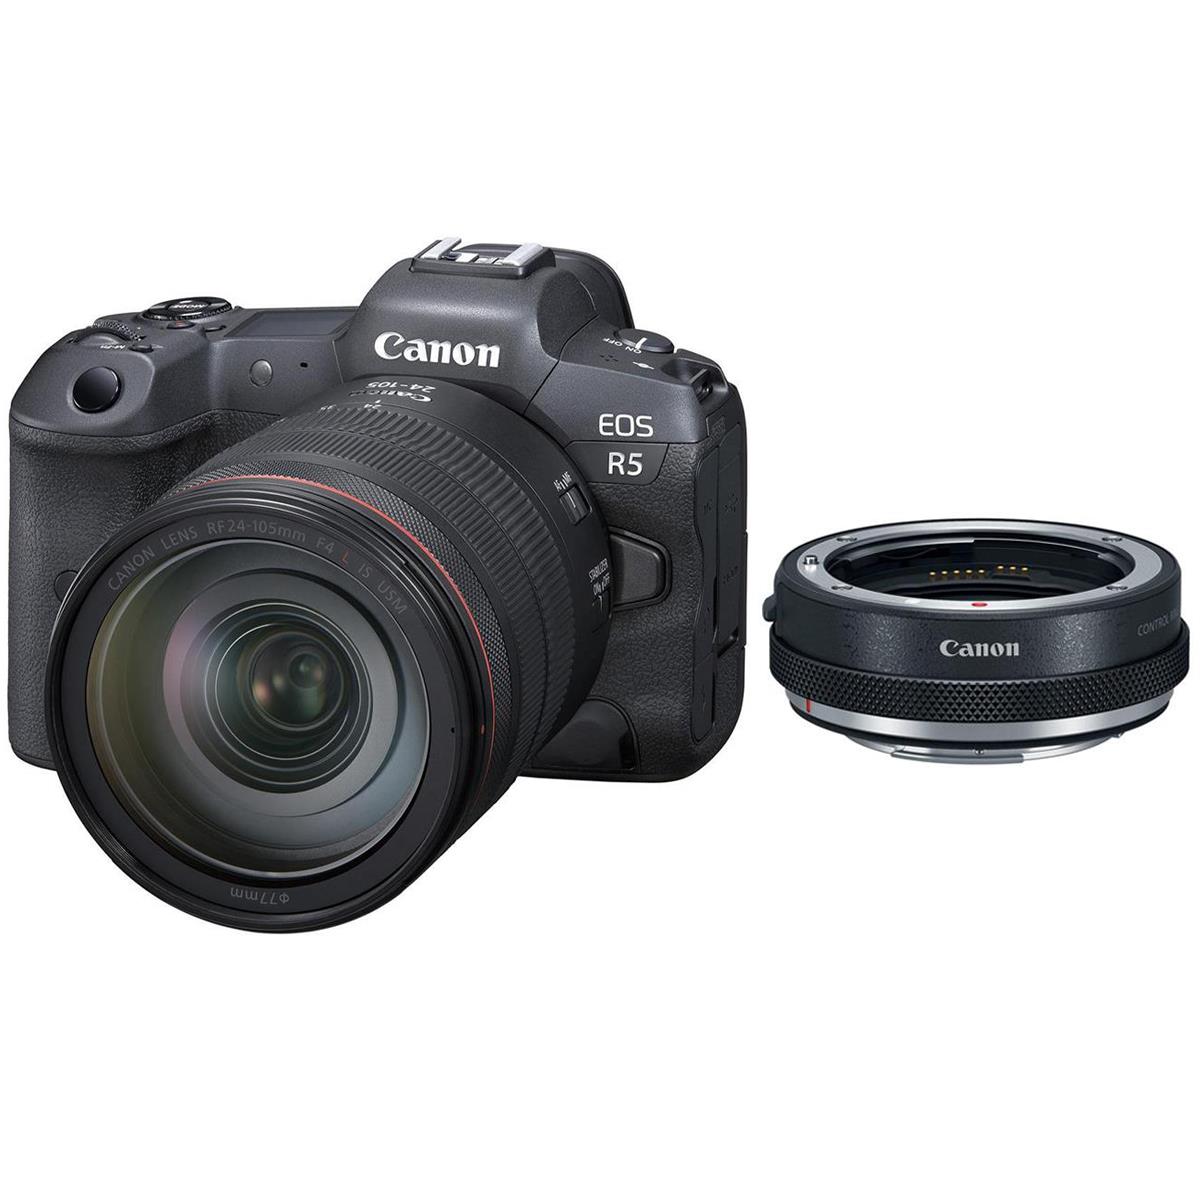 Image of Canon EOS R5 Camera with RF 24-105mm Lens